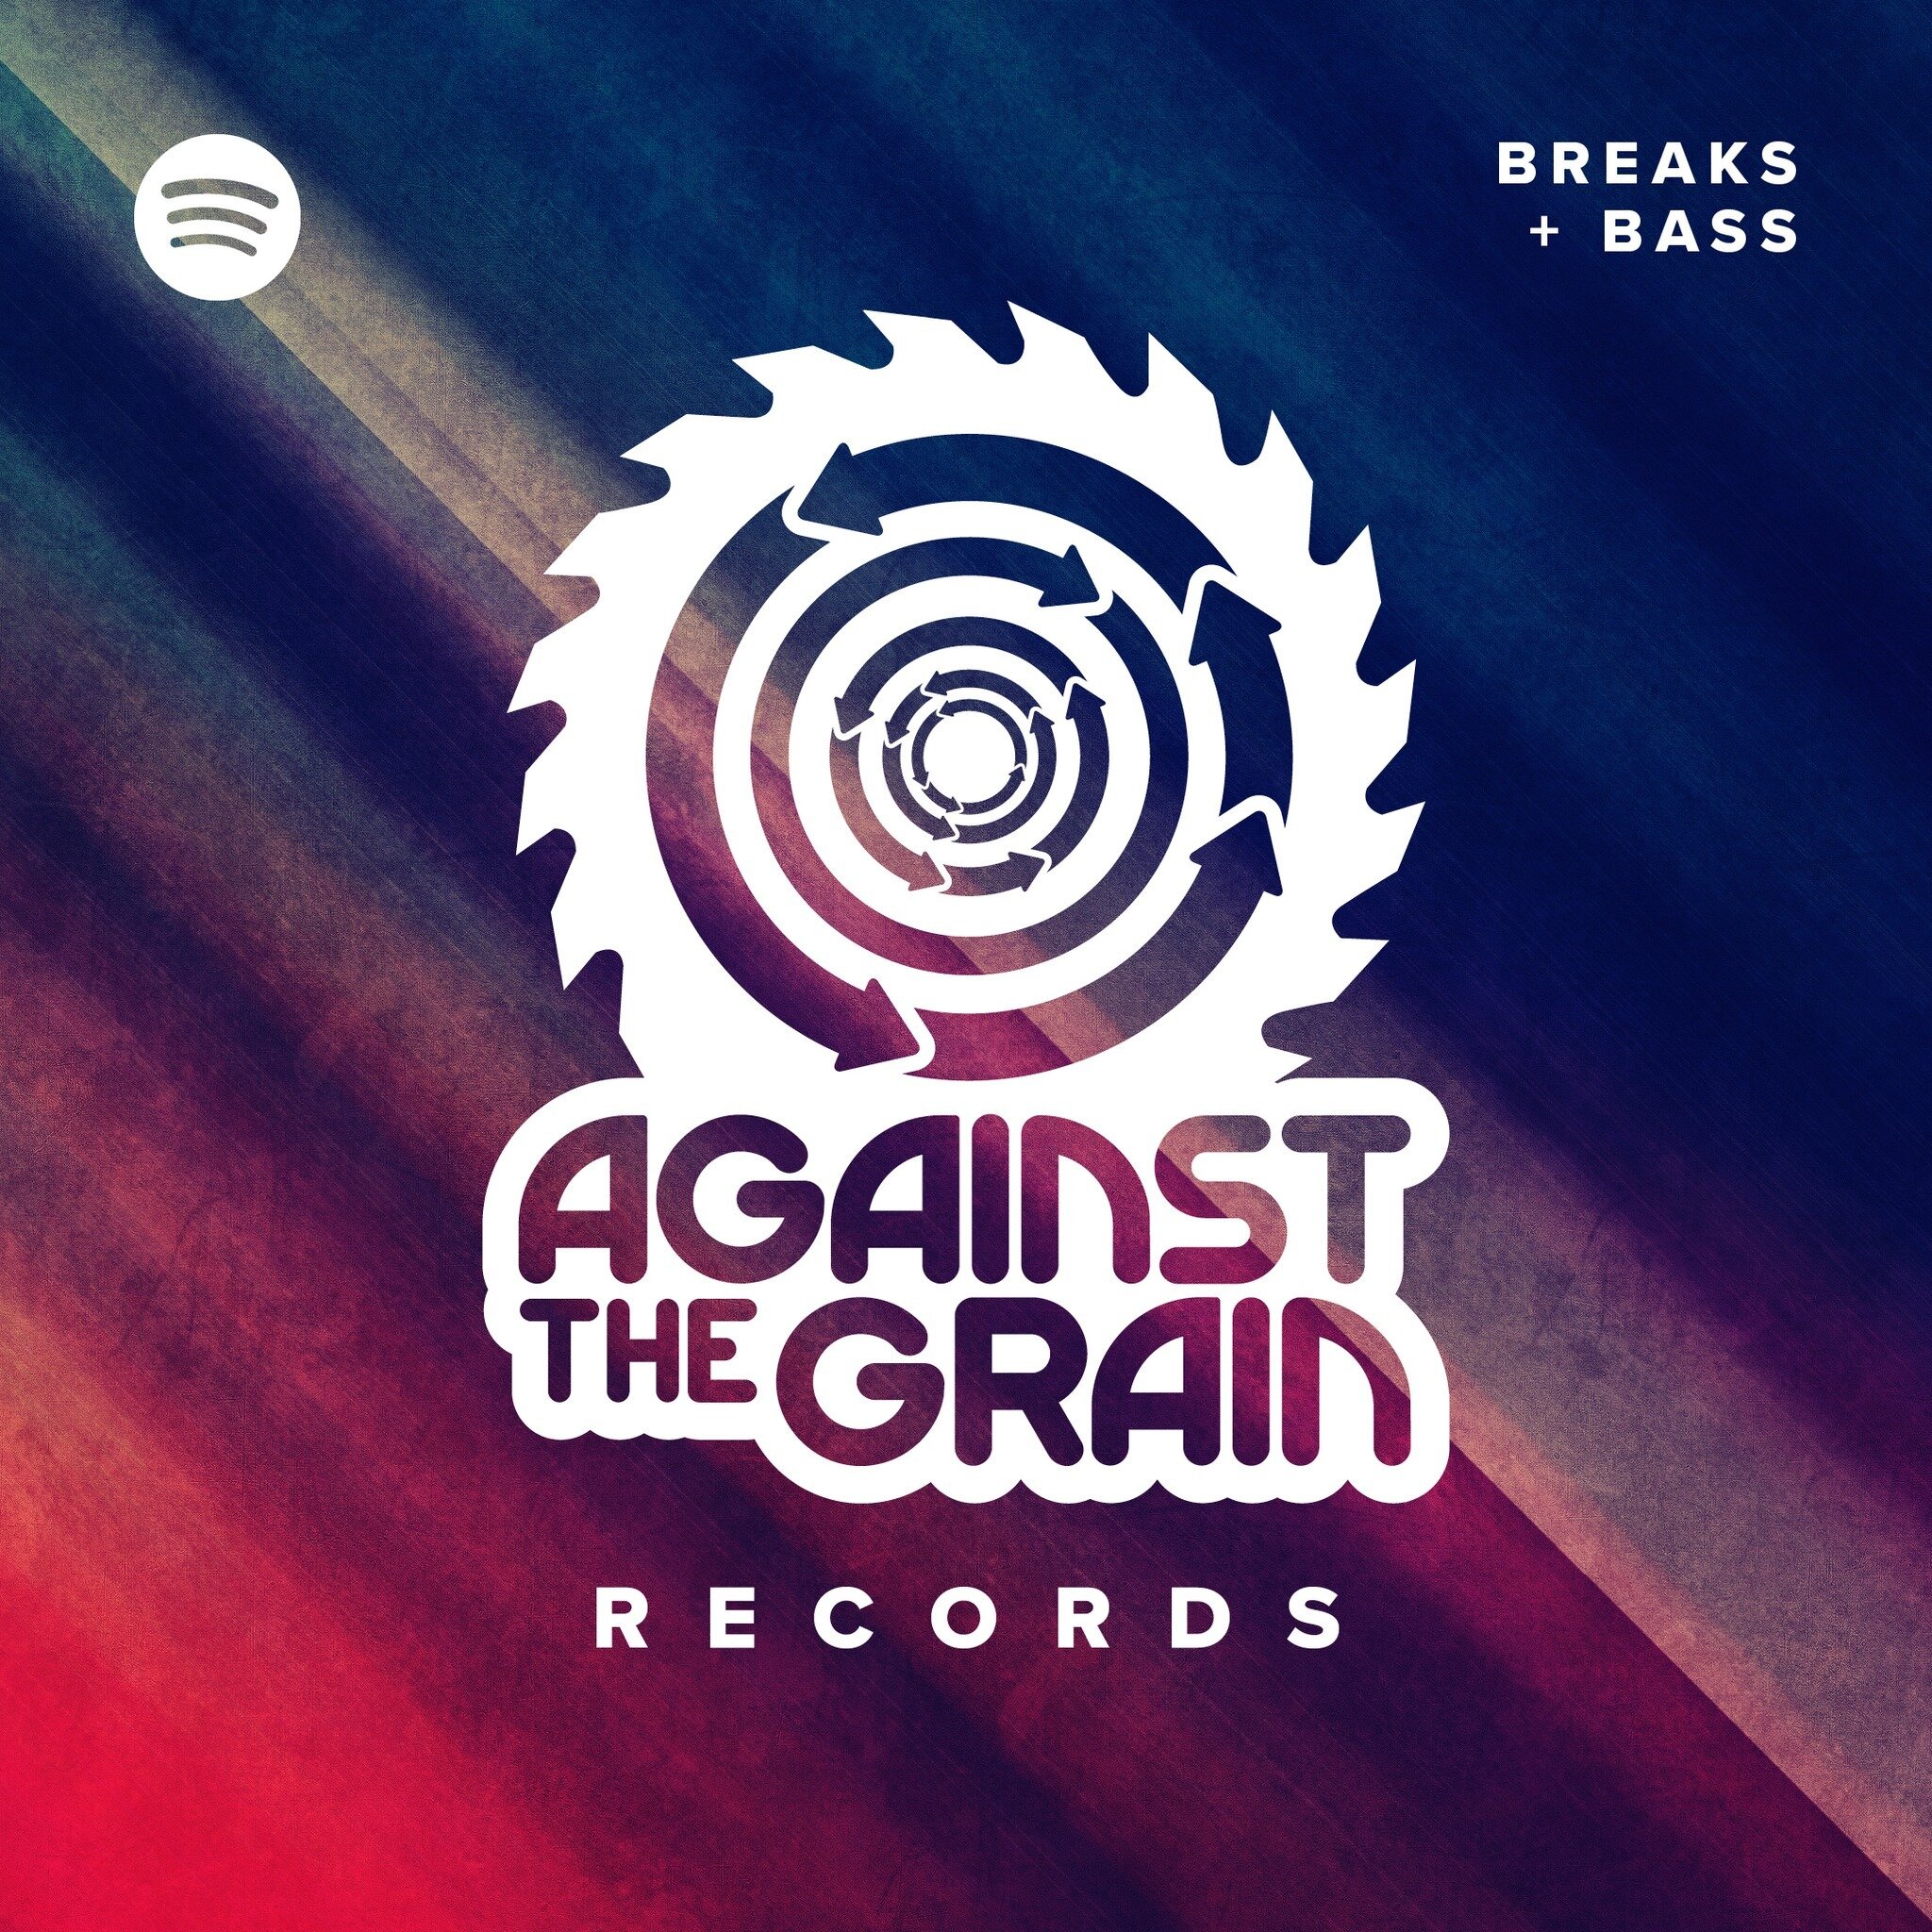 Breaks fanatics, we've created a new page on our website with 3 essential playlists you need to know about, including the official Against The Grain Spotify playlist. Check 'em out and tag your breaks mates below! 🙏 Playlist links in bio. 
👆